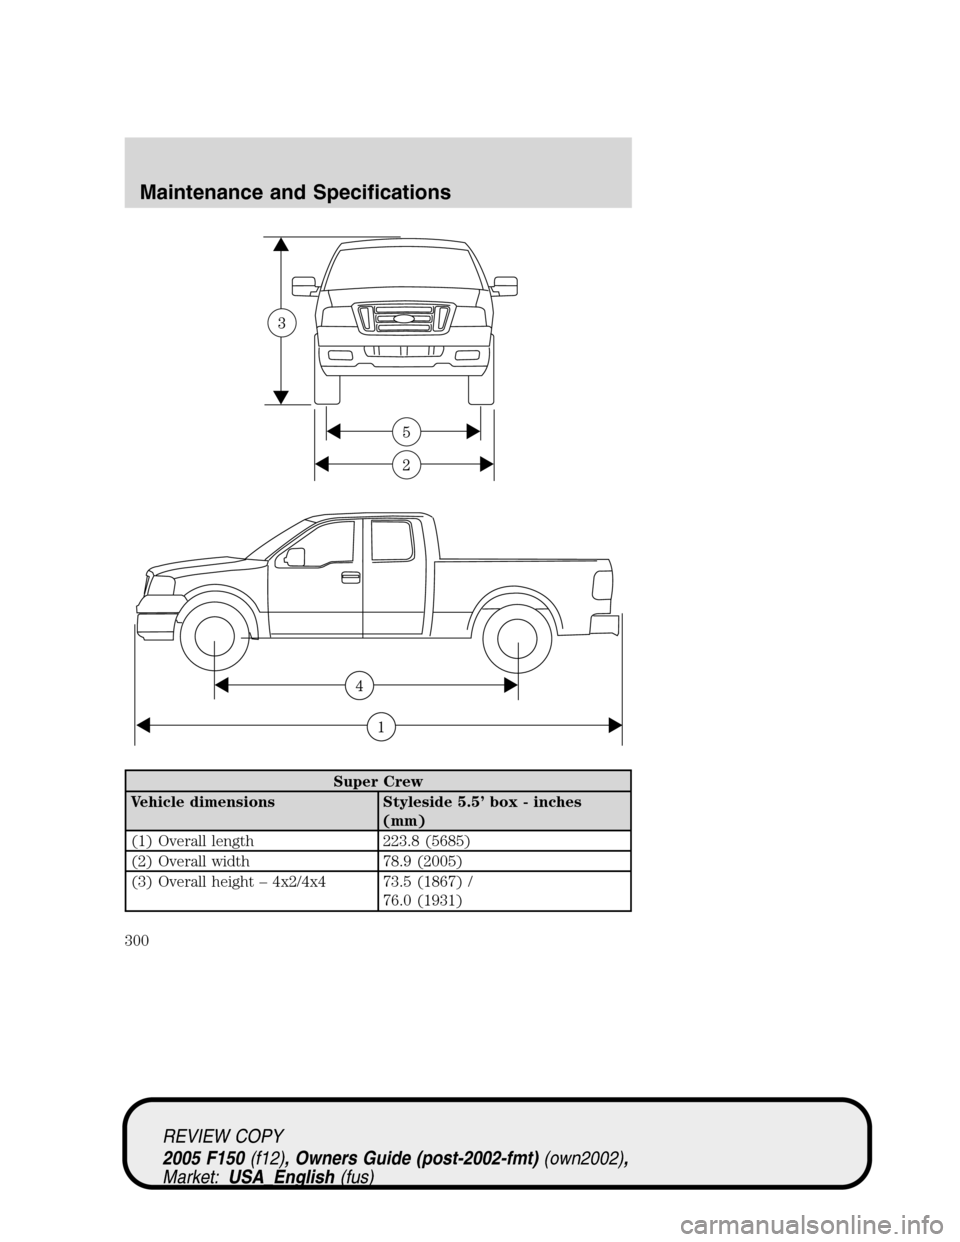 FORD F150 2005 11.G Owners Manual Super Crew
Vehicle dimensions Styleside 5.5’box - inches
(mm)
(1) Overall length 223.8 (5685)
(2) Overall width 78.9 (2005)
(3) Overall height–4x2/4x4 73.5 (1867) /
76.0 (1931)
REVIEW COPY
2005 F1